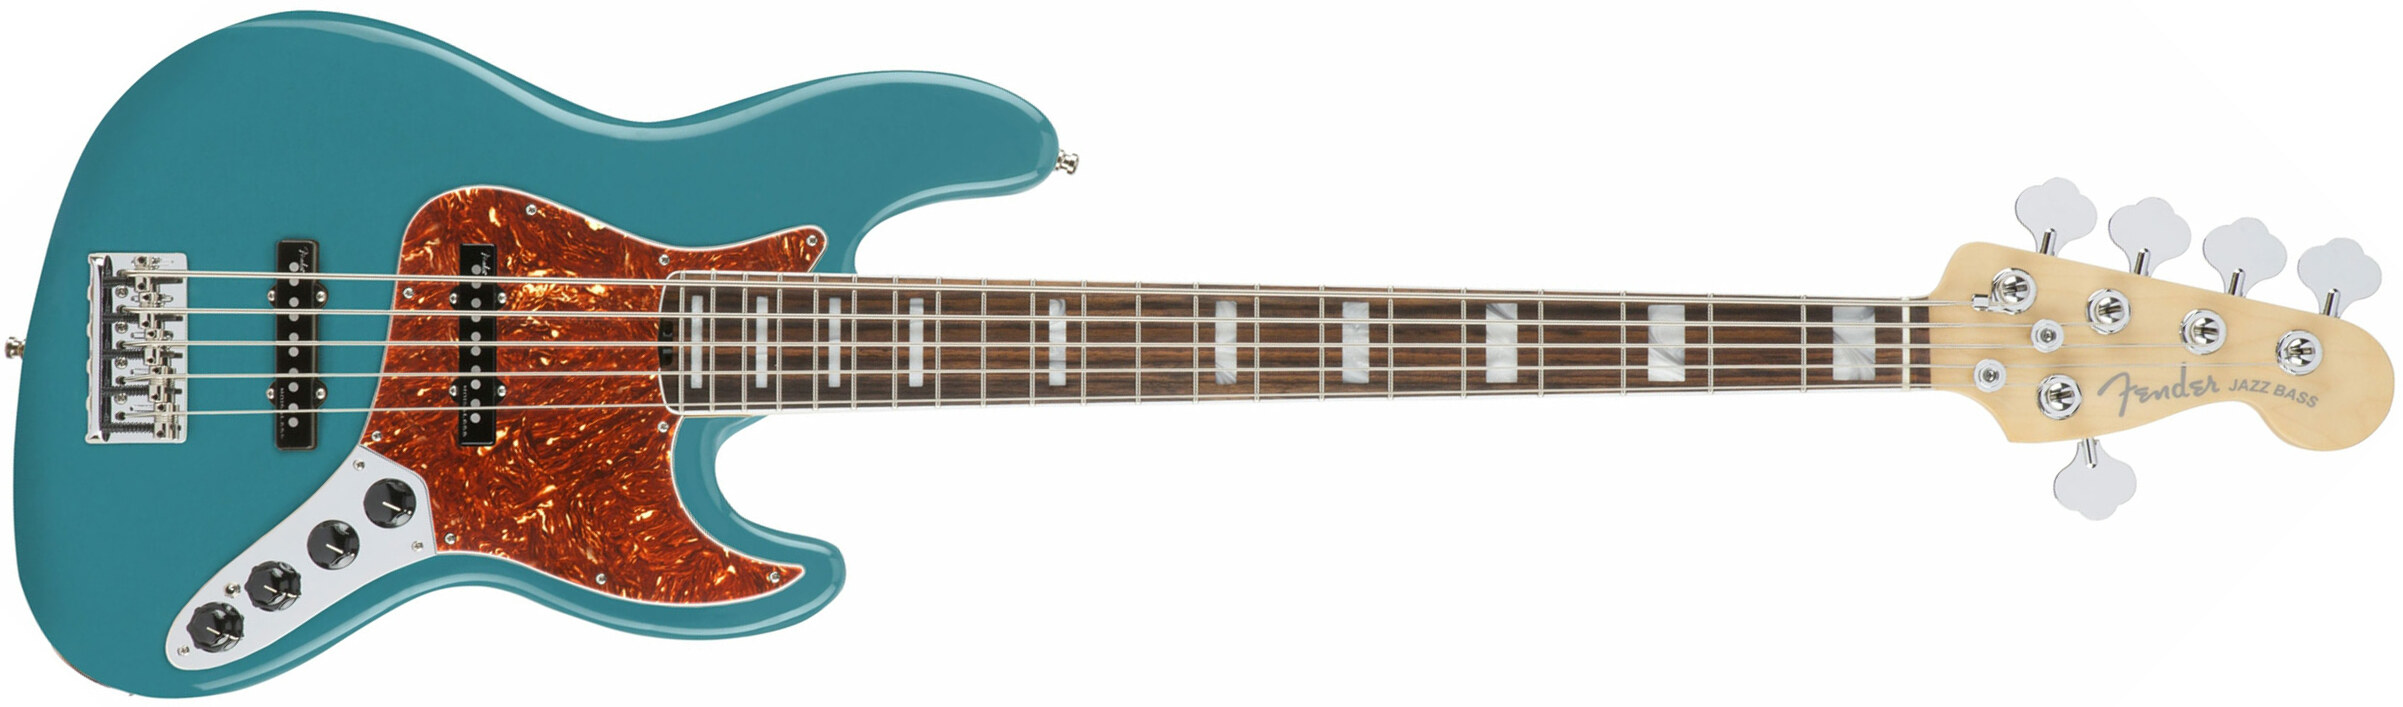 Fender American Elite Jazz Bass V Usa Eb - Ocean Turquoise - Basse Électrique Solid Body - Main picture